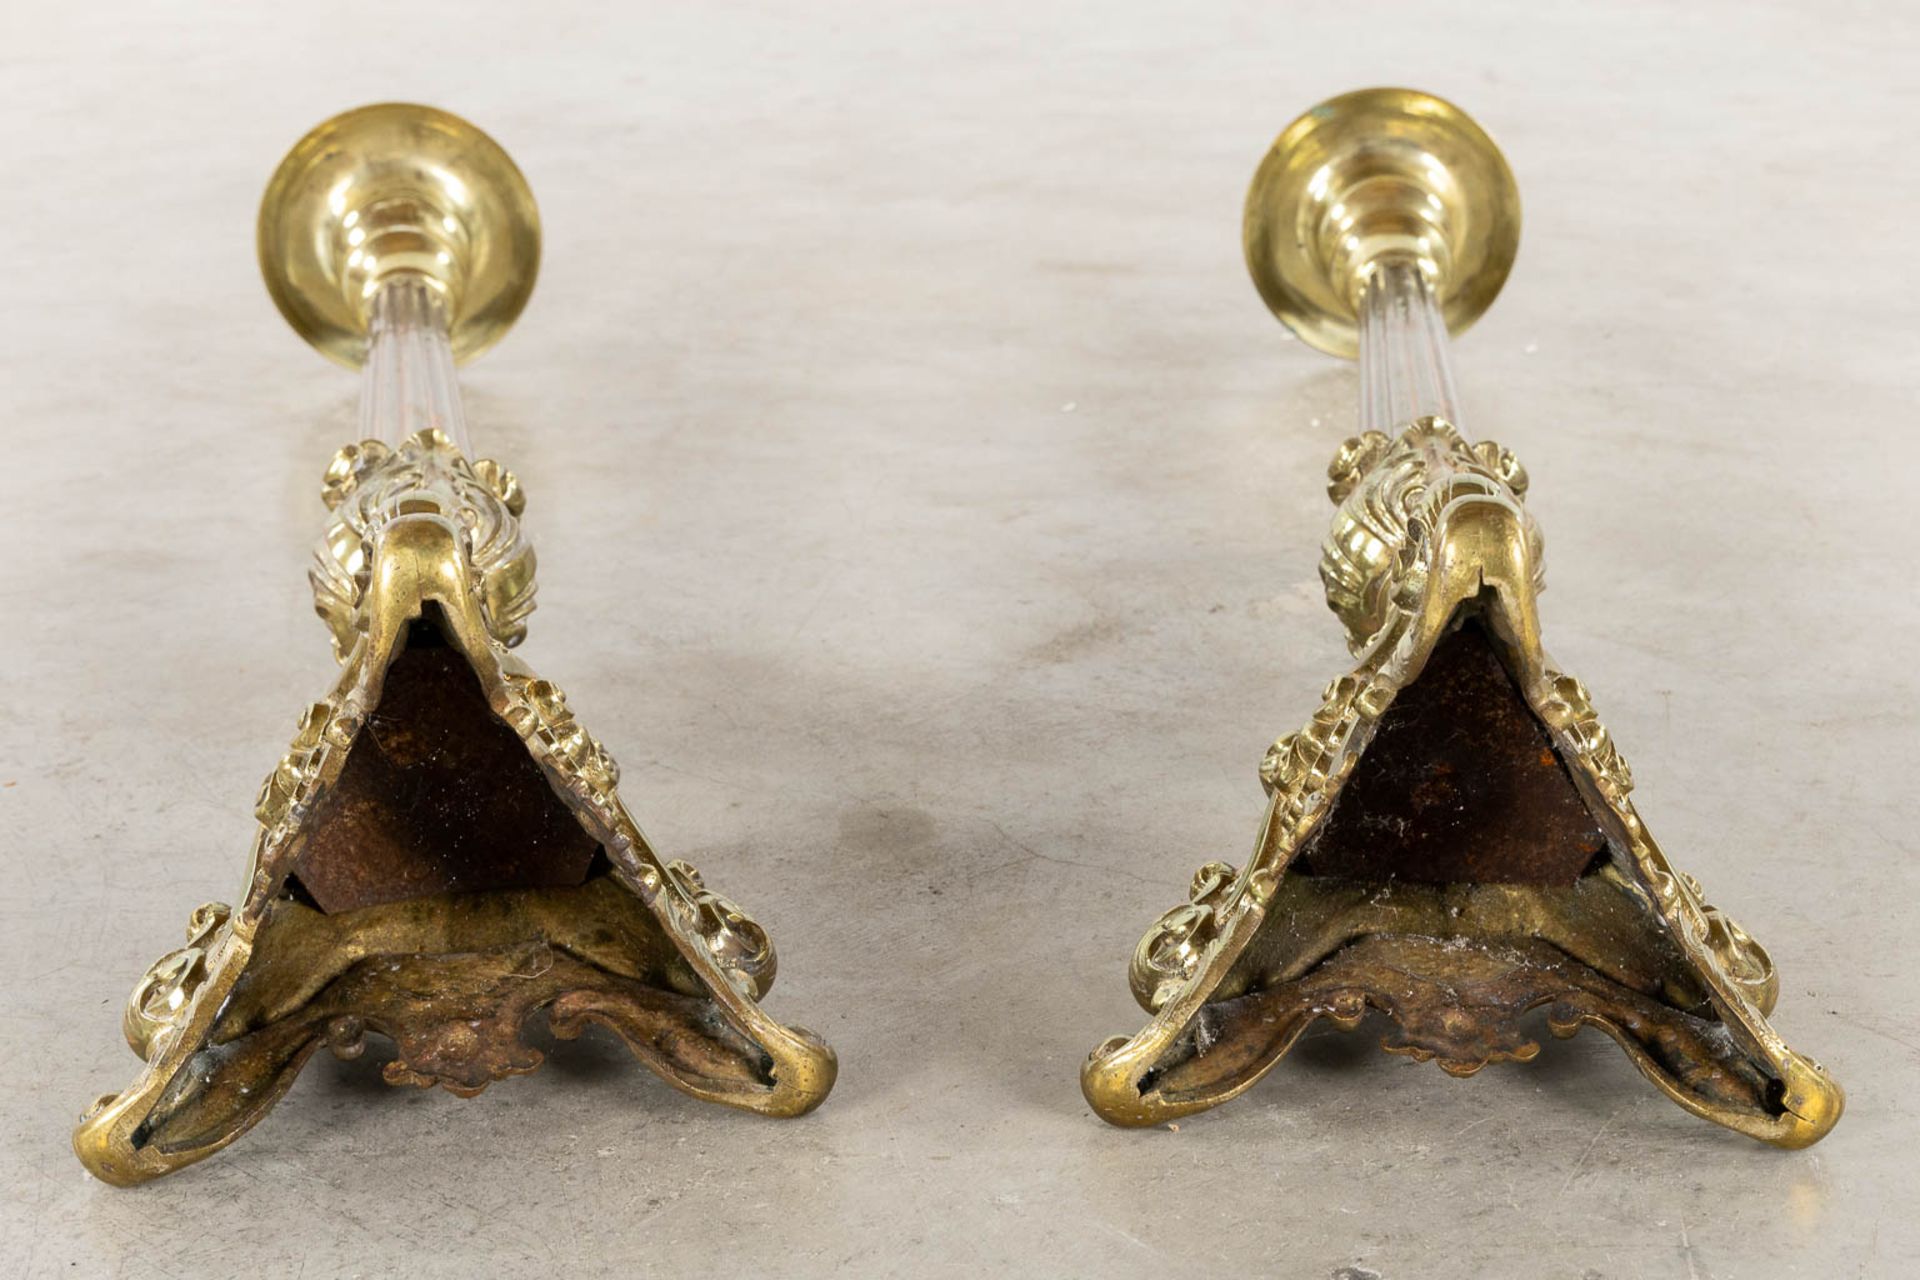 A pair of bronze church candlesticks/candle holders, Louis XV style. Circa 1900. (W:23 x H:105 cm) - Image 19 of 19